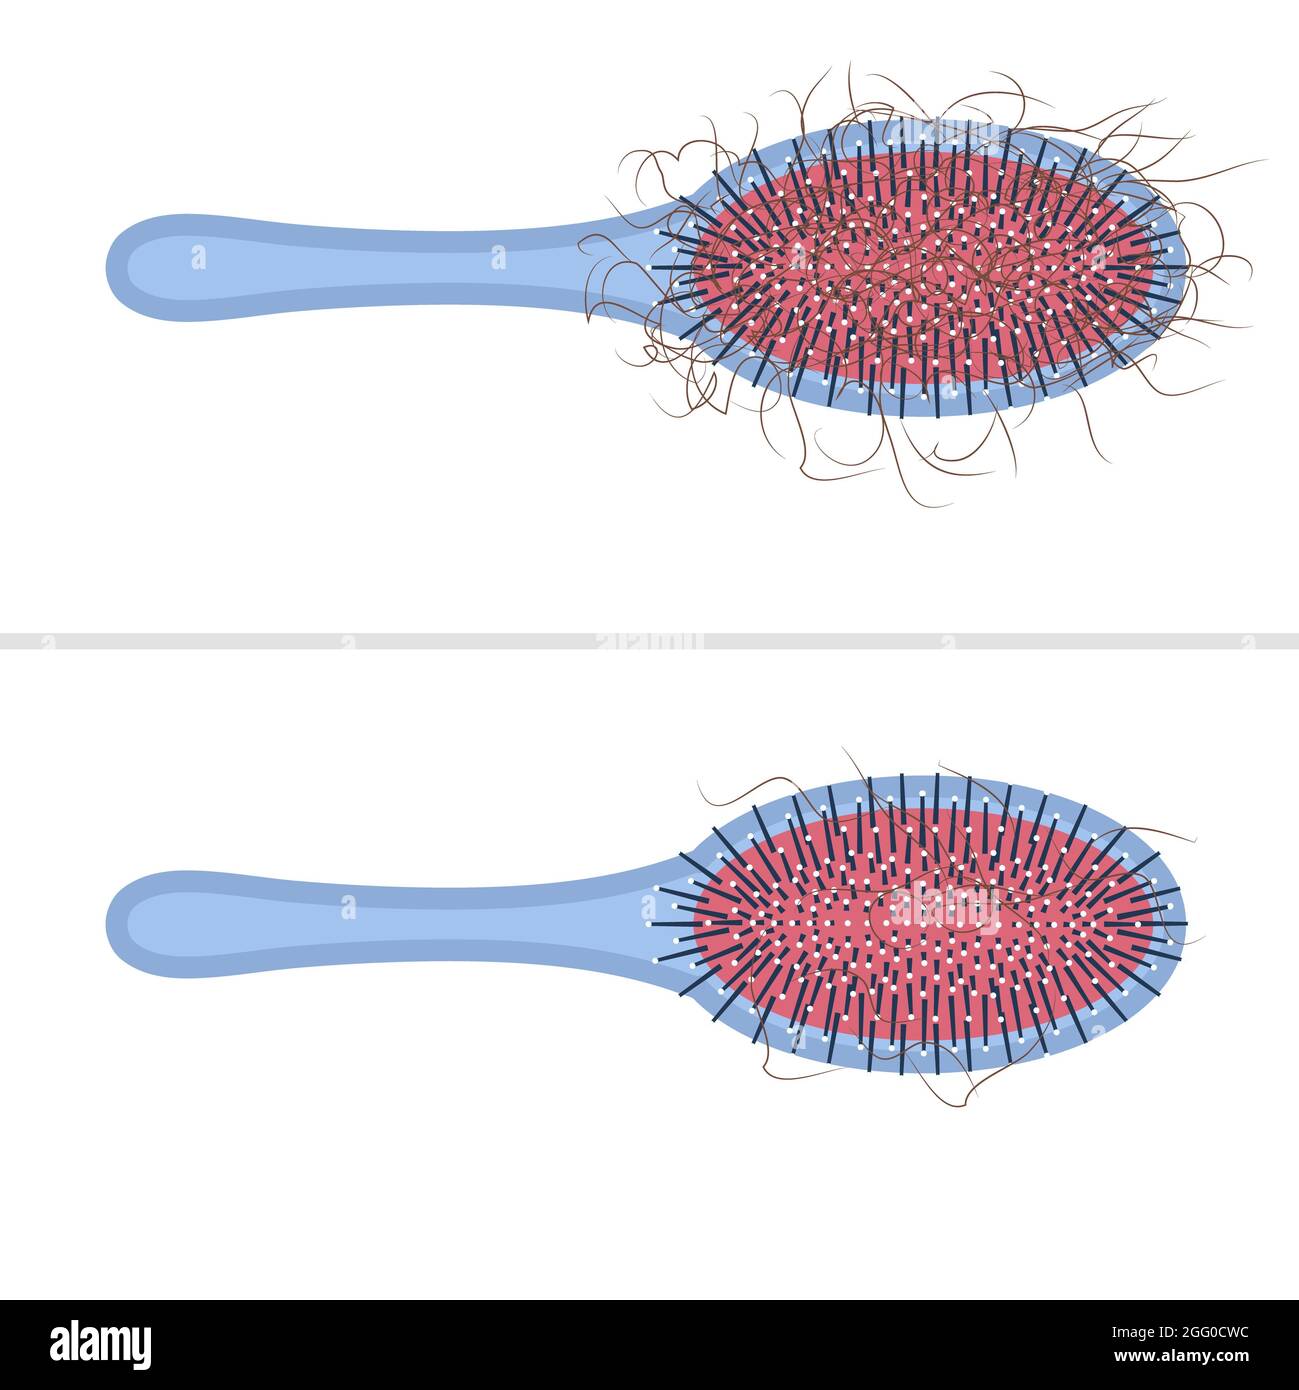 Hairbrush covered with hair, illustration. Stock Photo